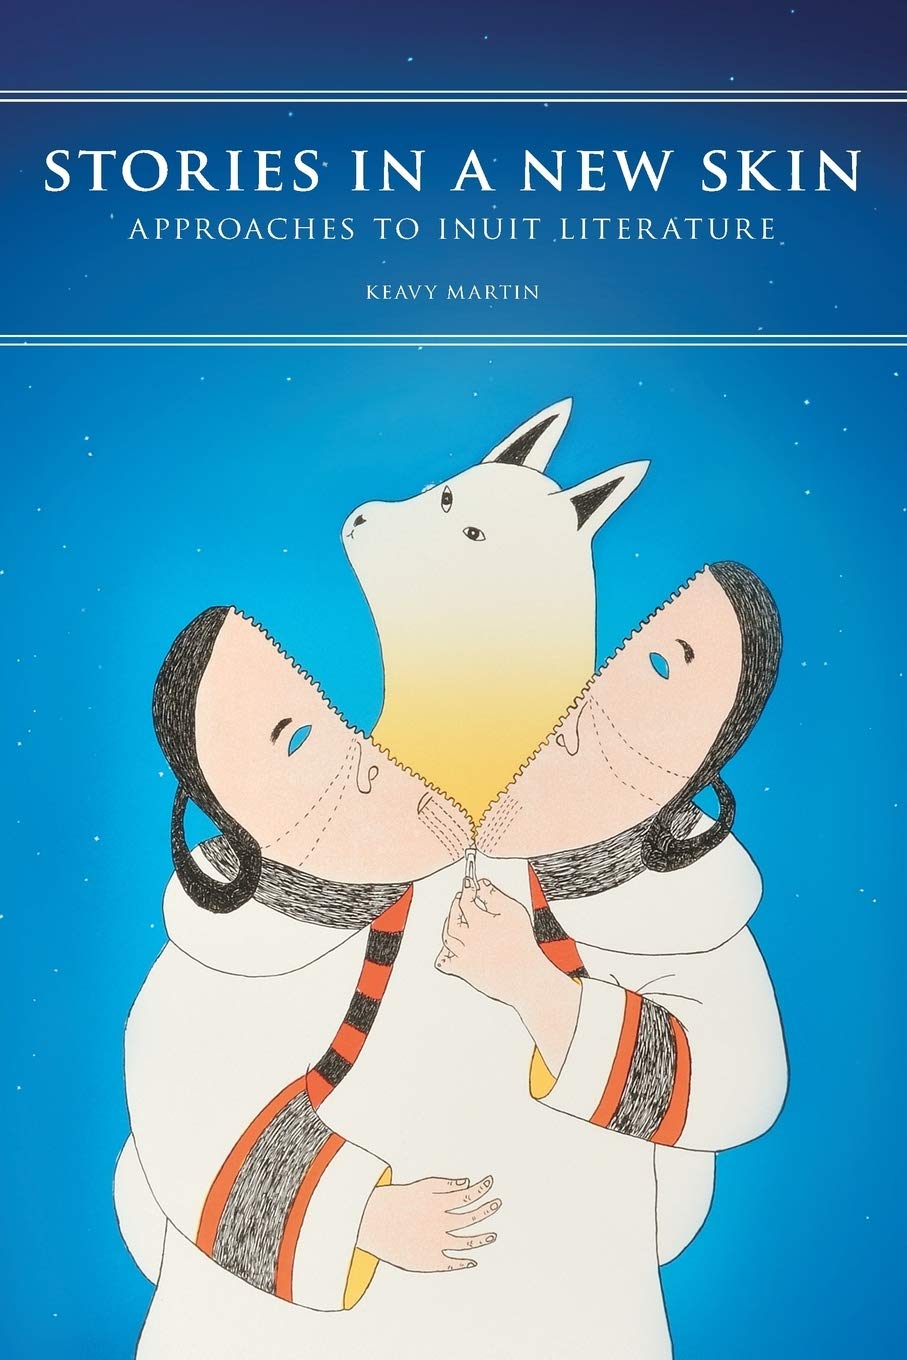 Stories in a New Skin: Approaches to Inuit Literature